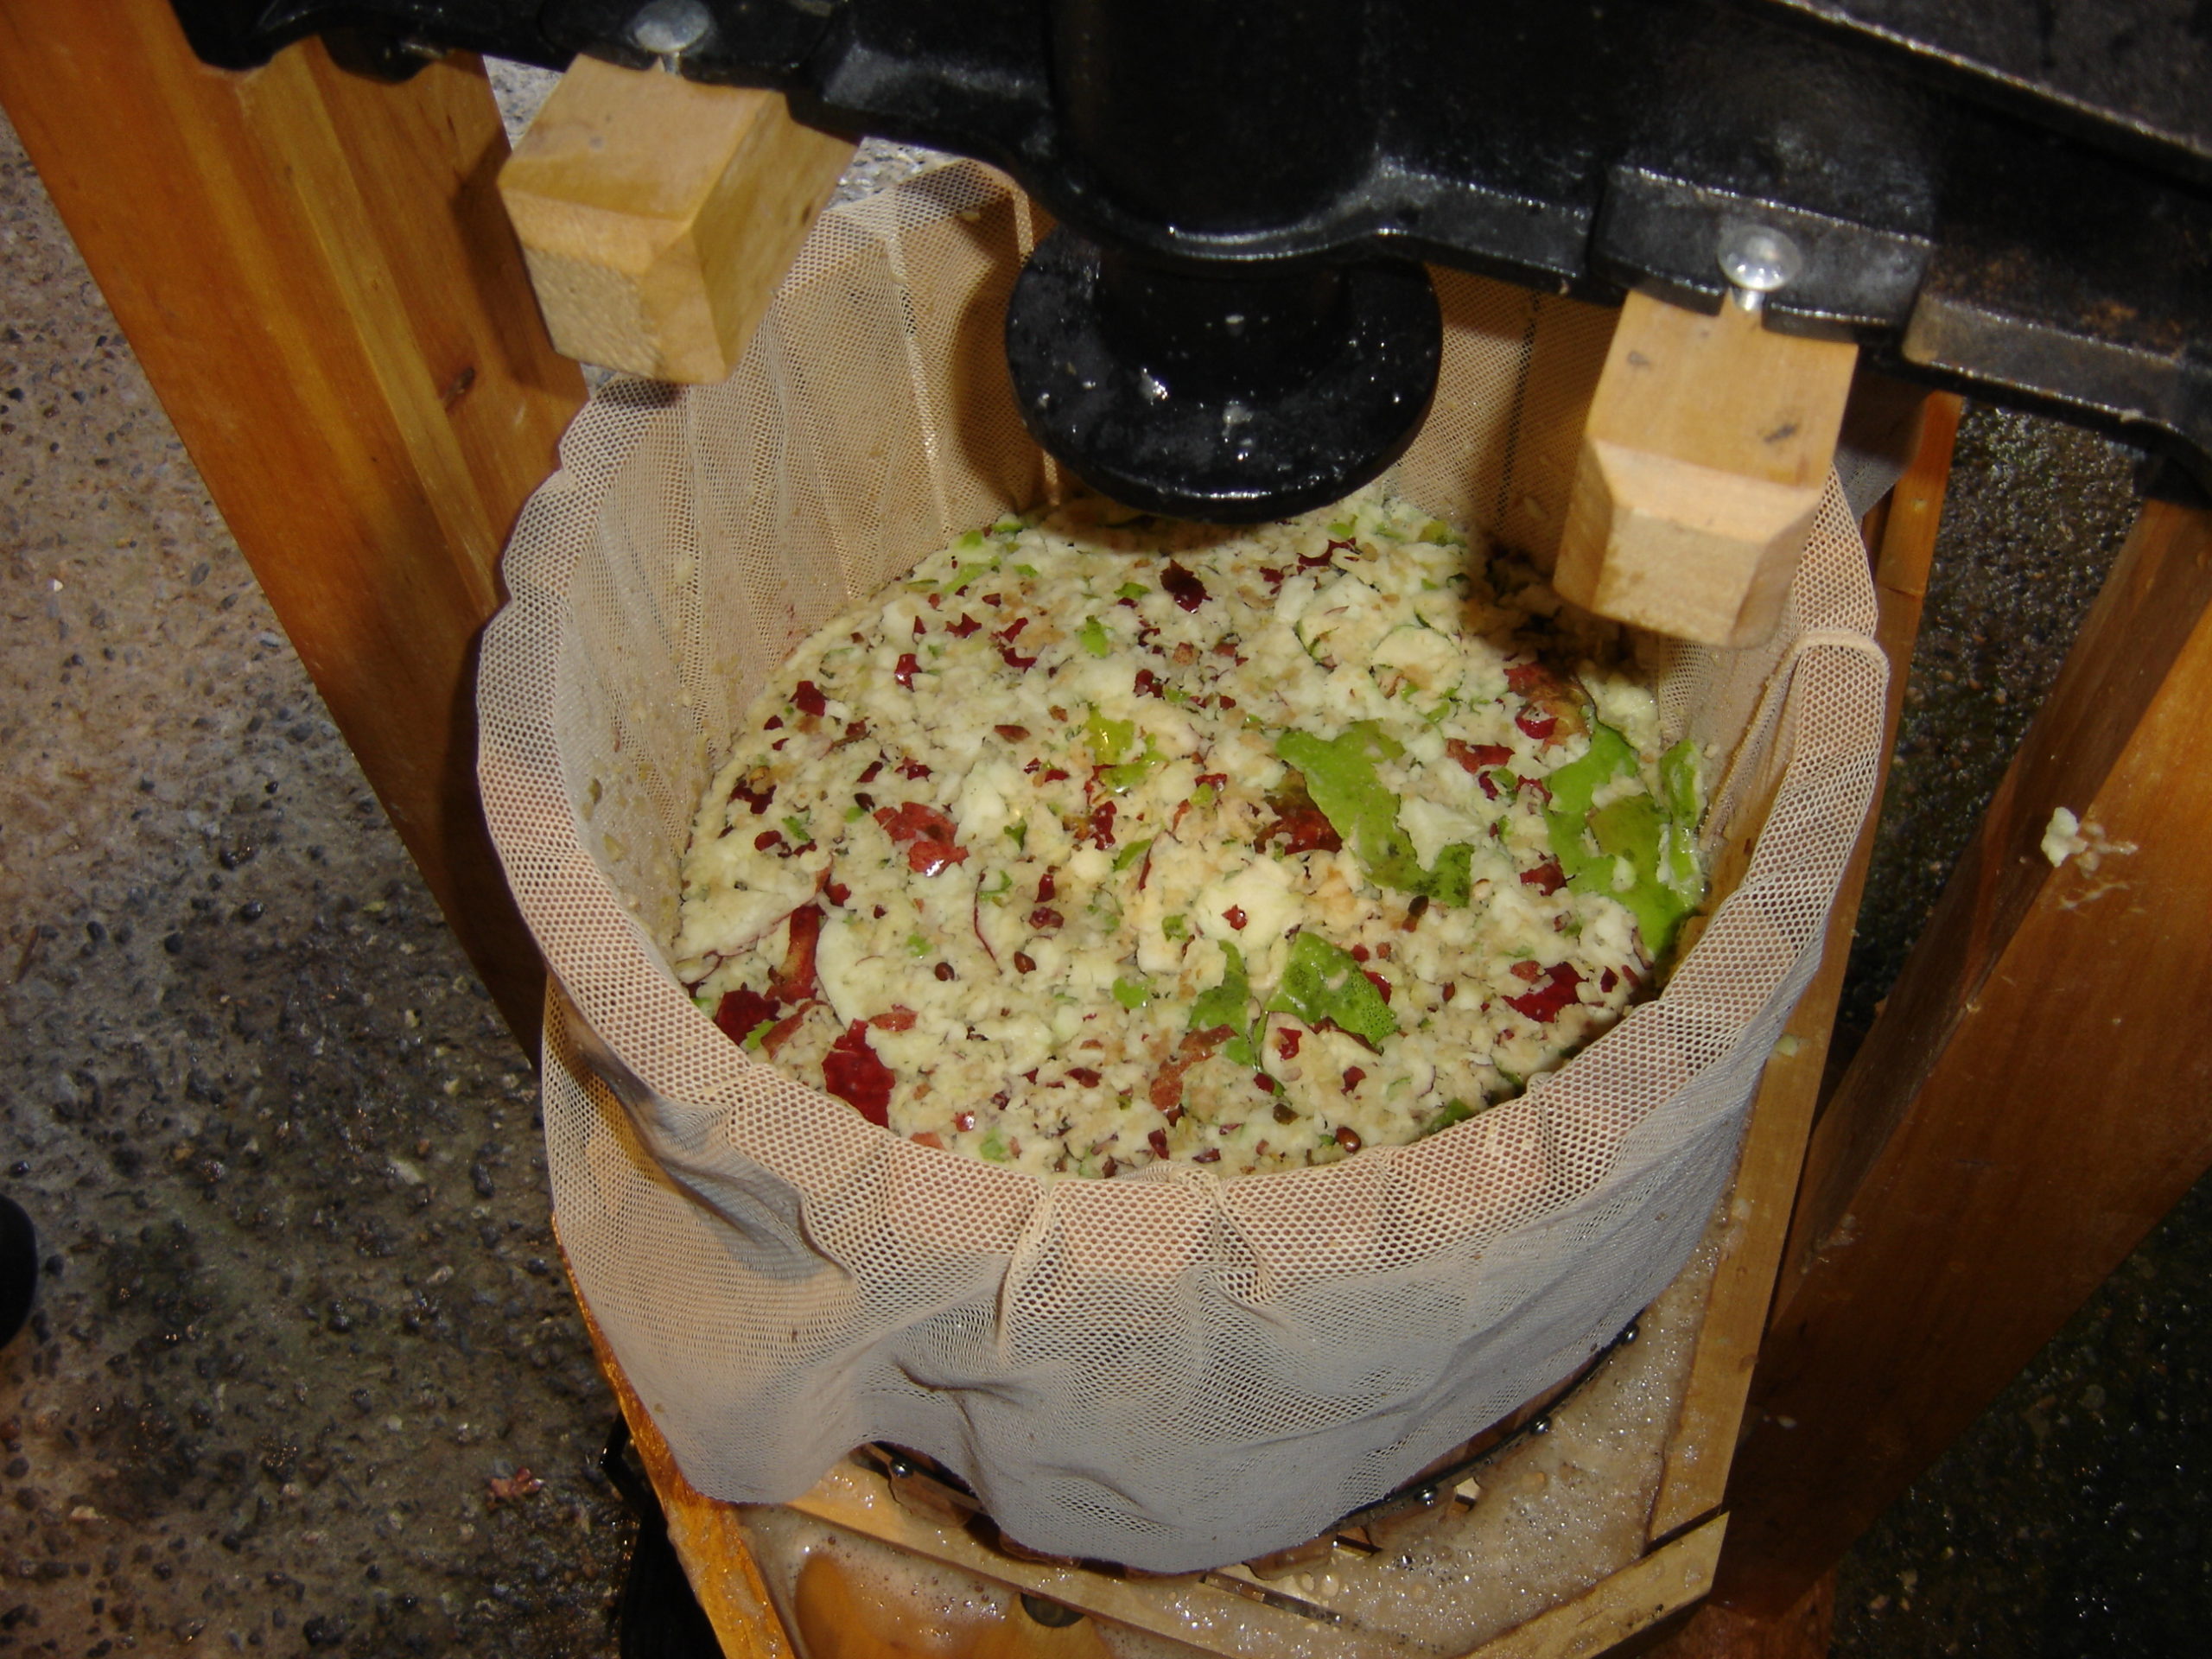 After grinding, the apples fall into a wooden basket with a mesh liner, and they are ready for pressing.